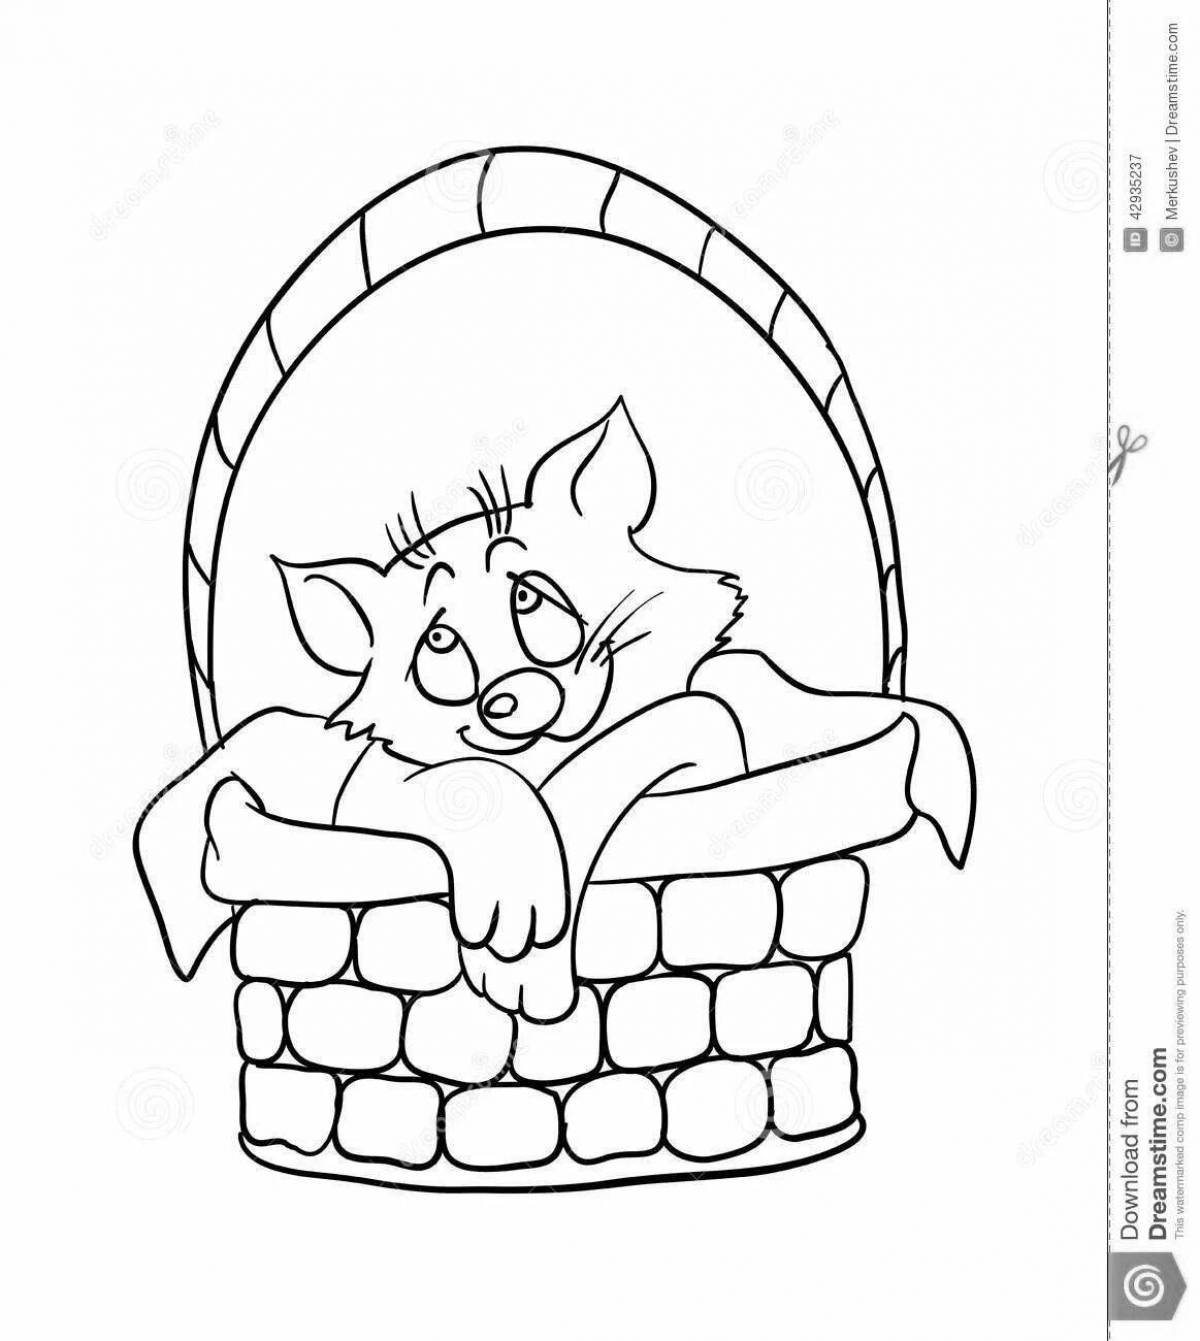 Coloring page fluffy cat in a basket